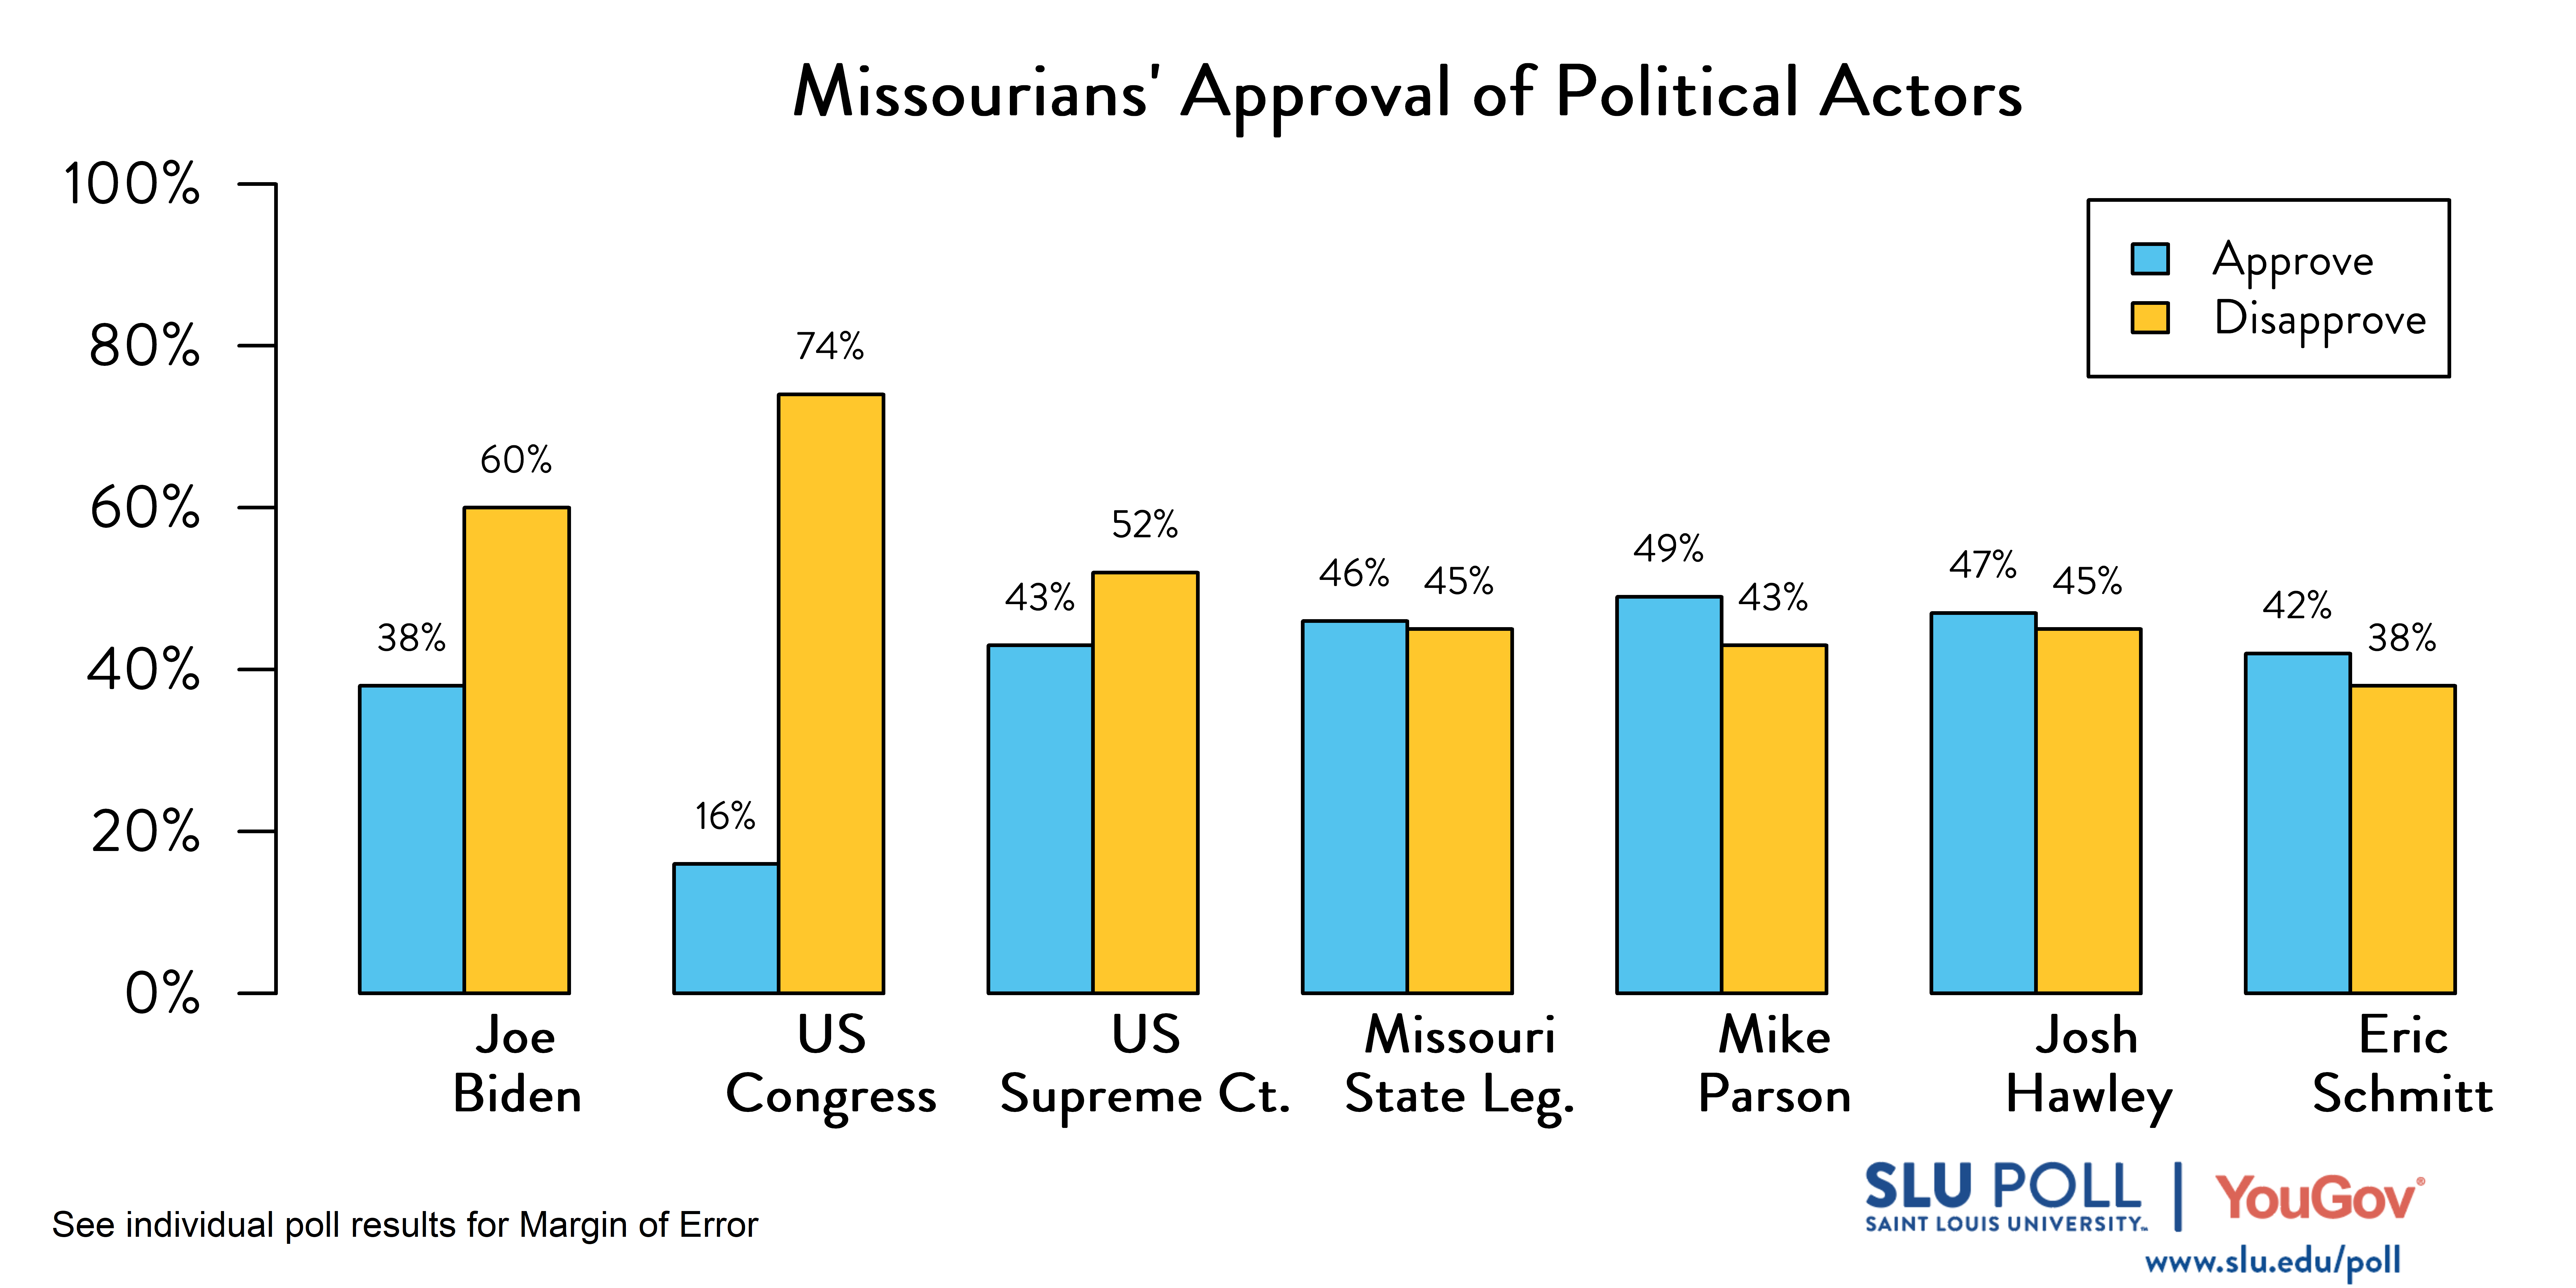 Likely voters’ responses to ‘Do you approve or disapprove of the way each is doing their job: President Joe Biden? 38% approve, 60% disapprove; U.S. Congress: 16% Approve, 74% disapprove; U.S. Supreme Ct. 43% approve, 52% disapprove, Missouri State Leg. 46% approve, 45% disapprove, Mike Parson, 49% approve, 43% disapprove, Josh Hawley 47% approve, 45% disapprove, Eric Schmitt 42% approve, 38% disapprove.